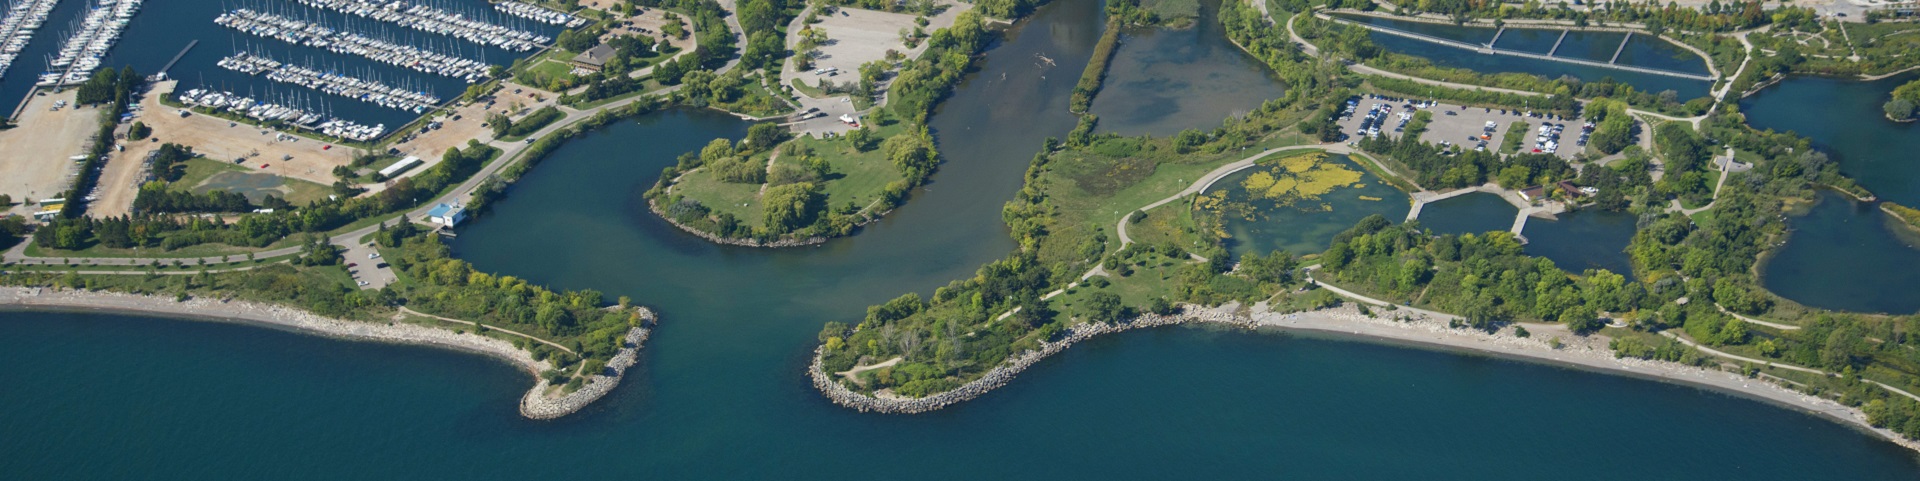 mouth of Mimico Creek